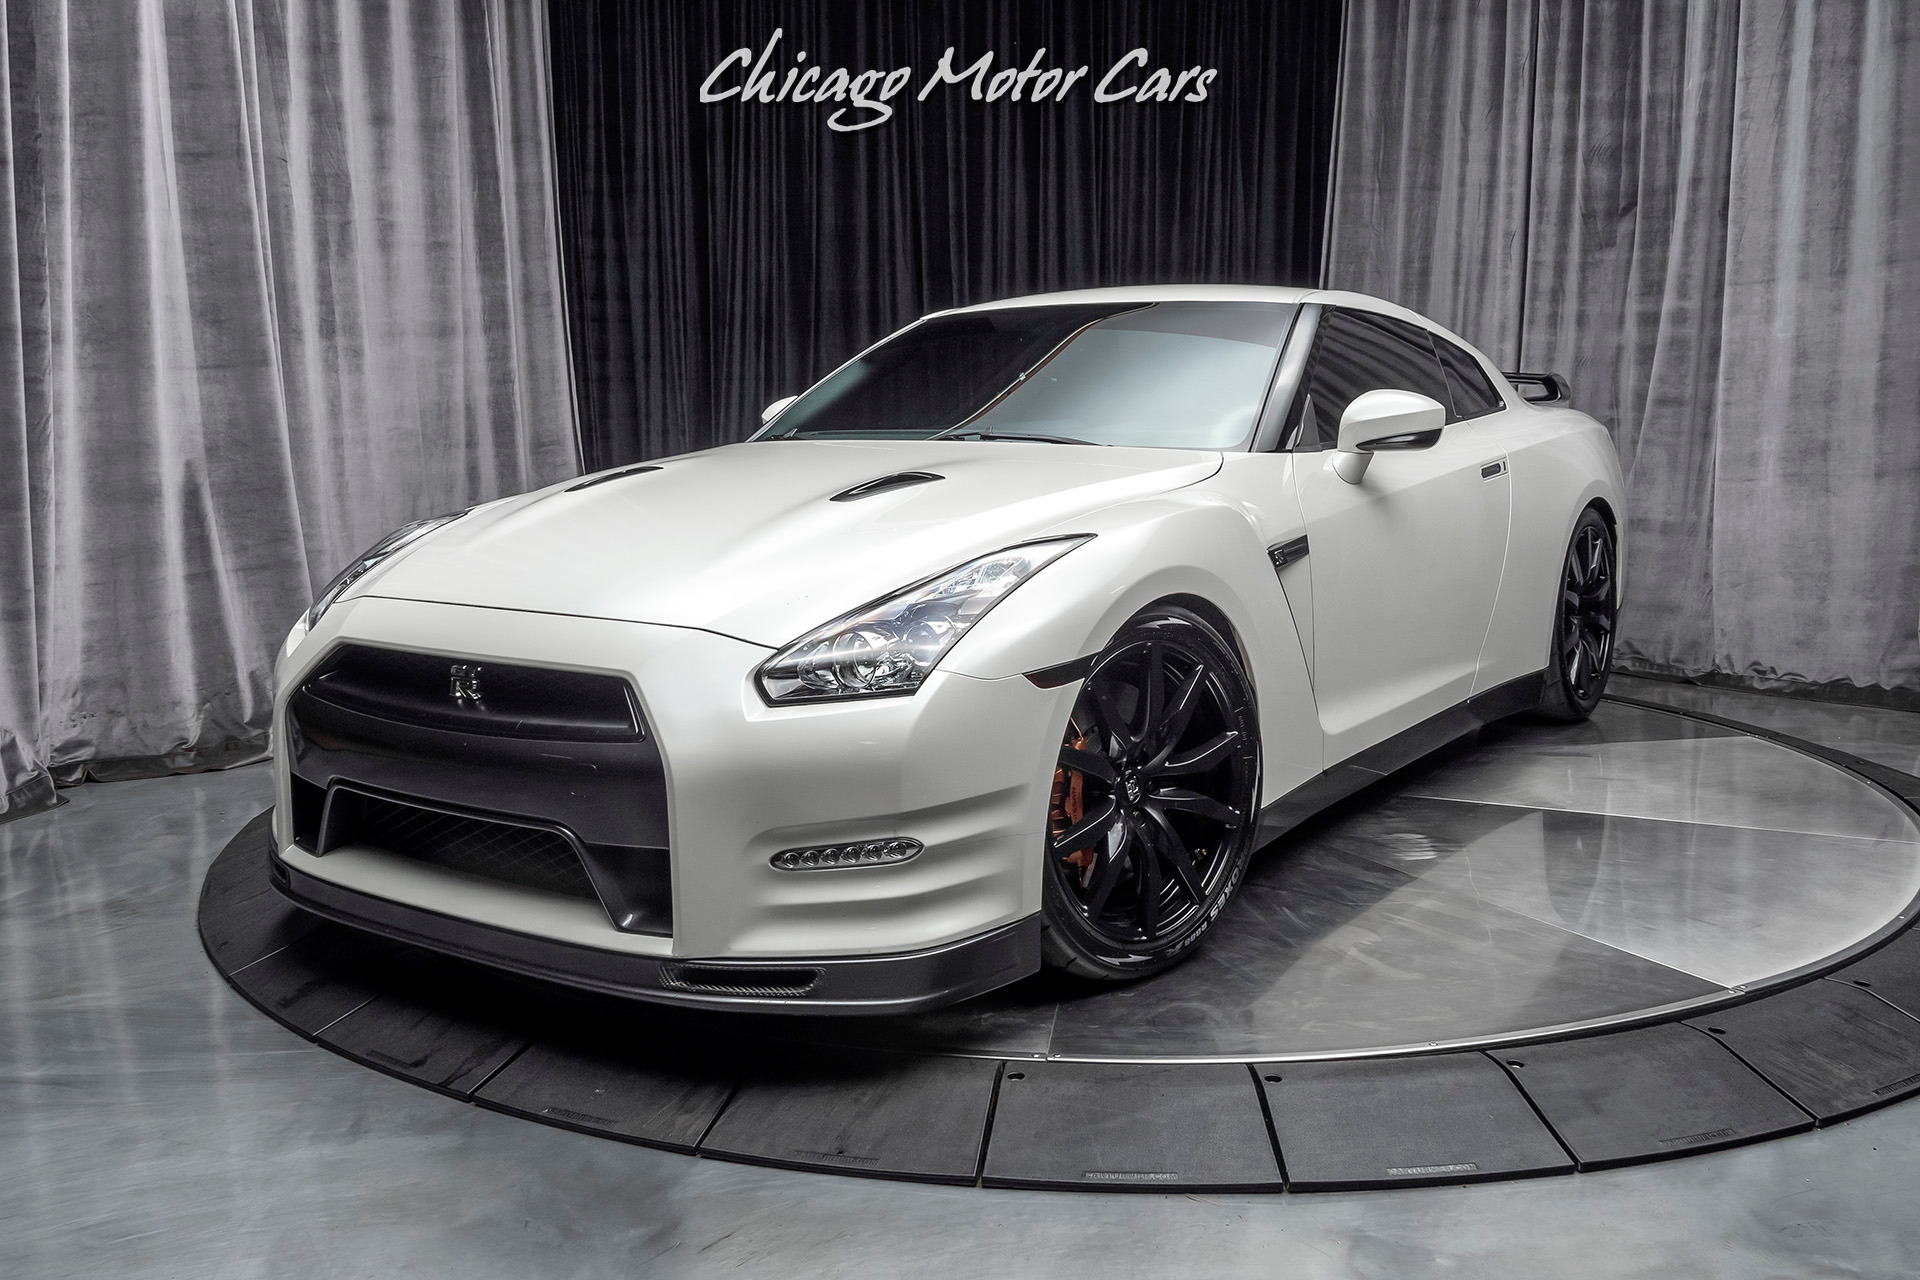 Used-2013-Nissan-GT-R-Premium-850HP-Over-46k-in-Receipts-BUILT